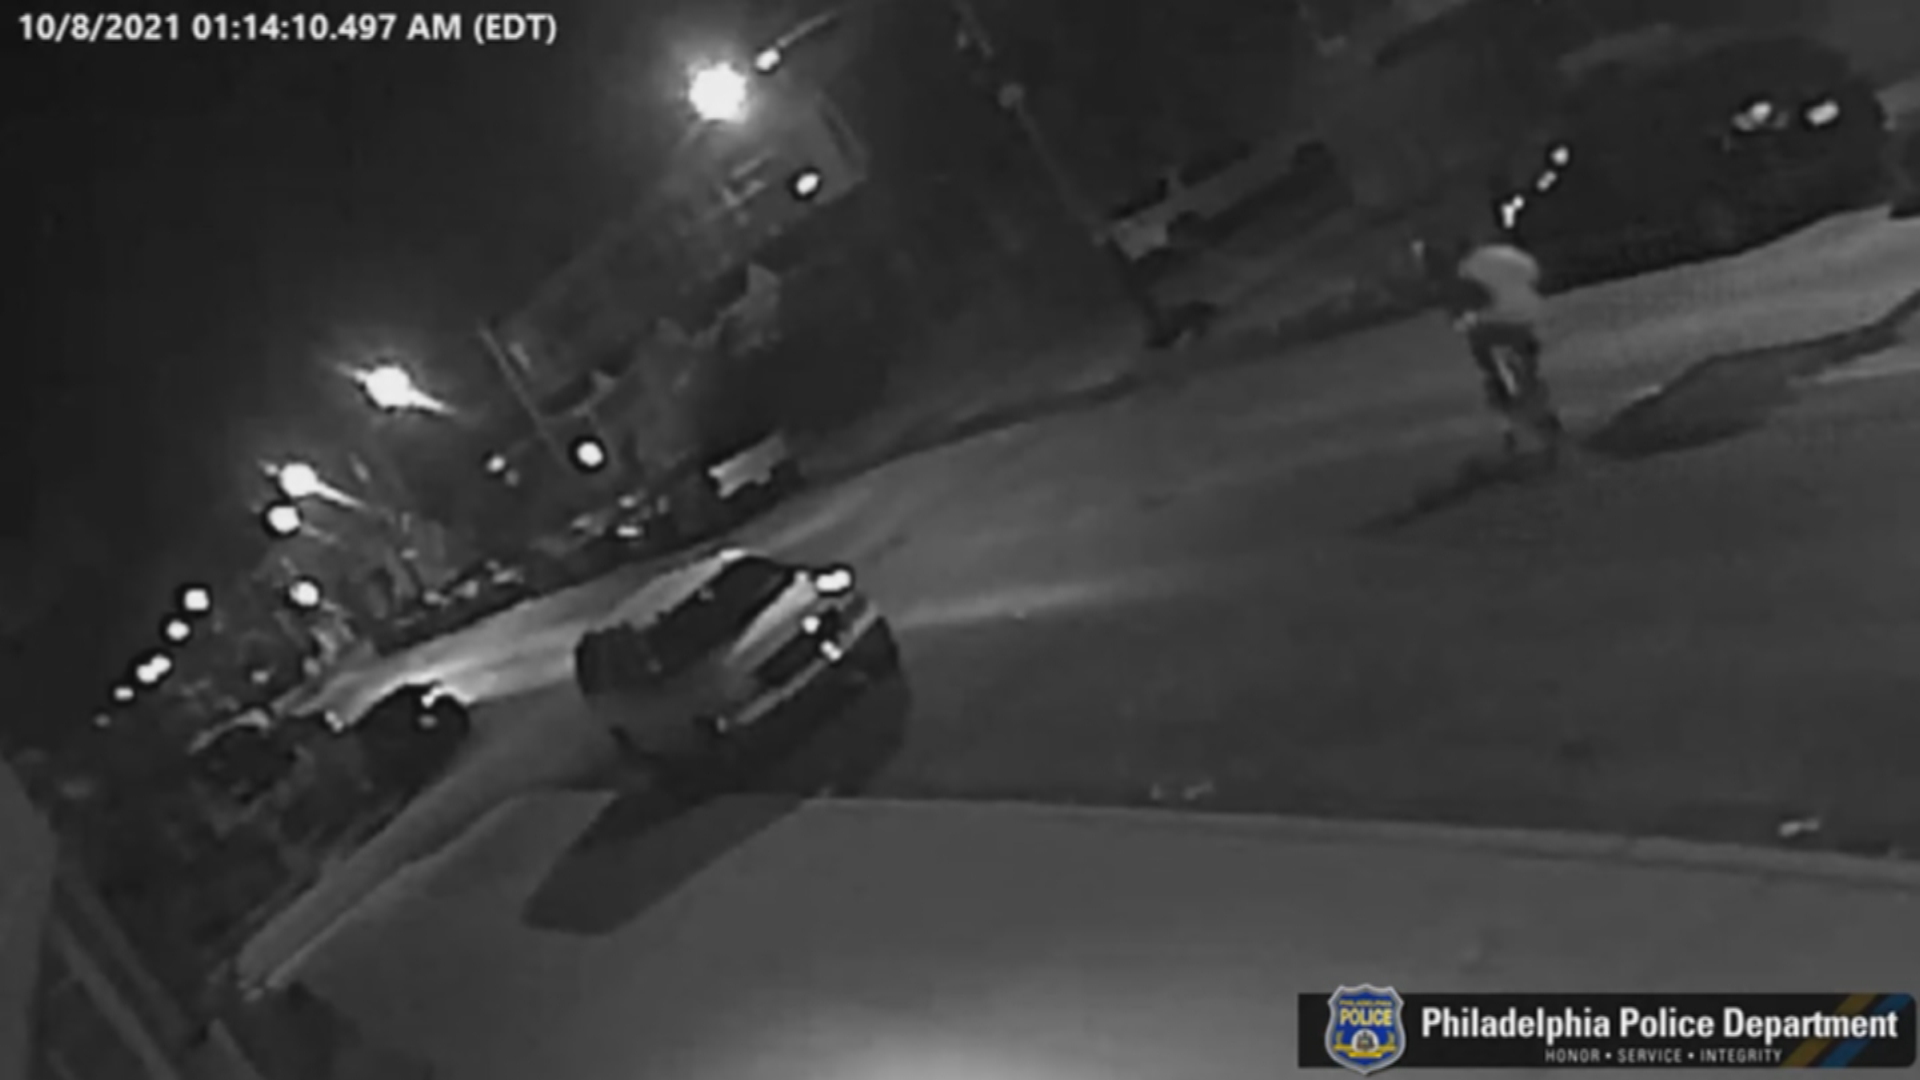 Police Release New Surveillance Video Of West Philadelphia Shooting From October 2021